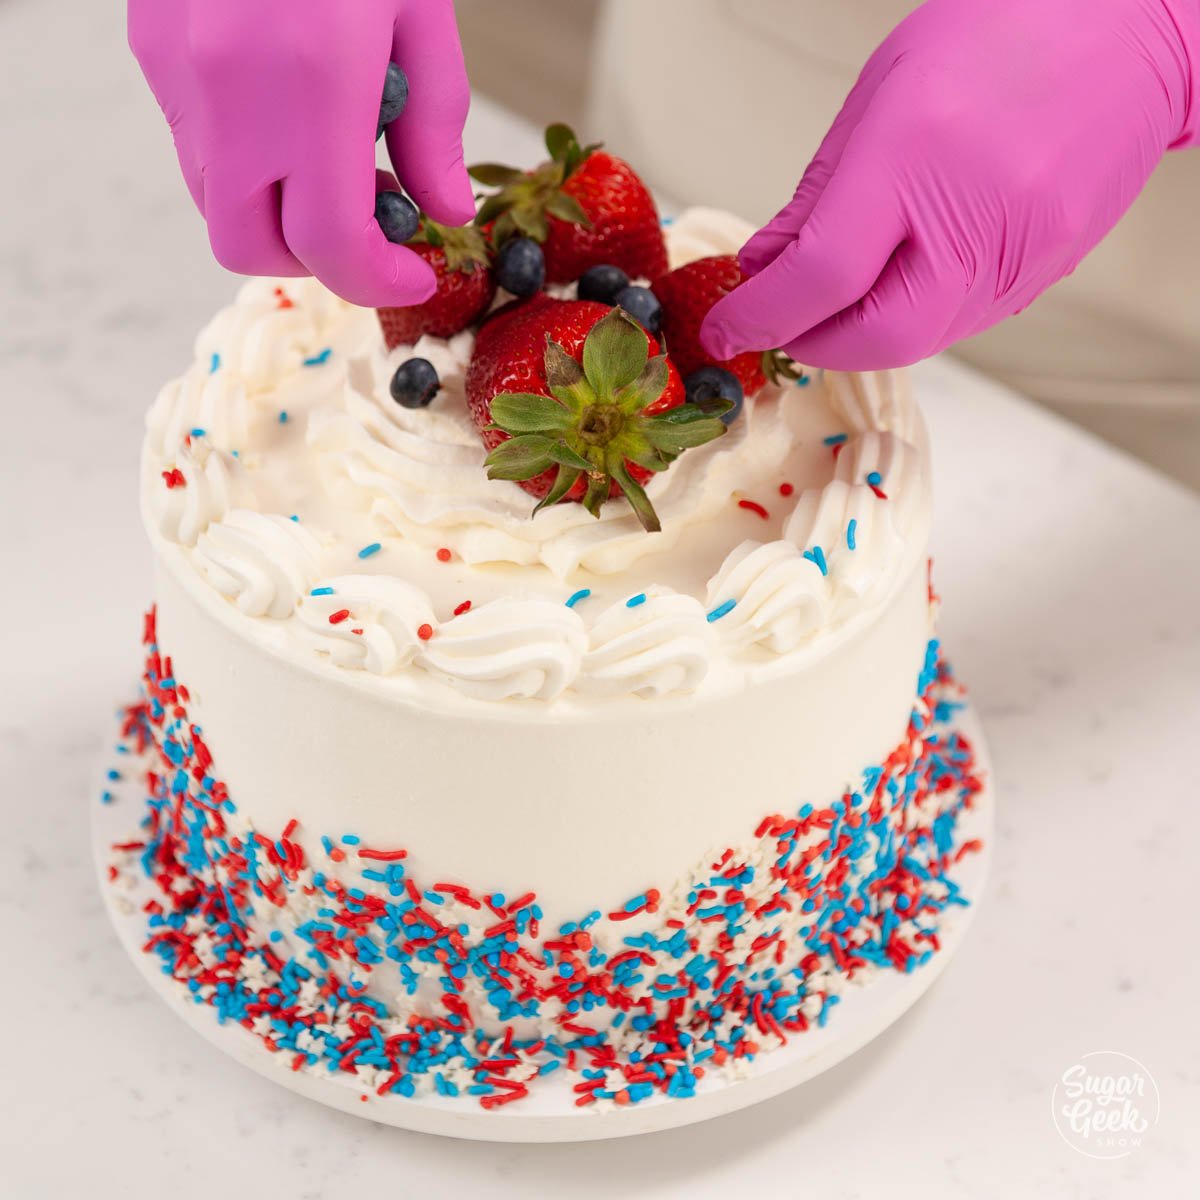 adding strawberries and blueberries to the top of the ice cream cake